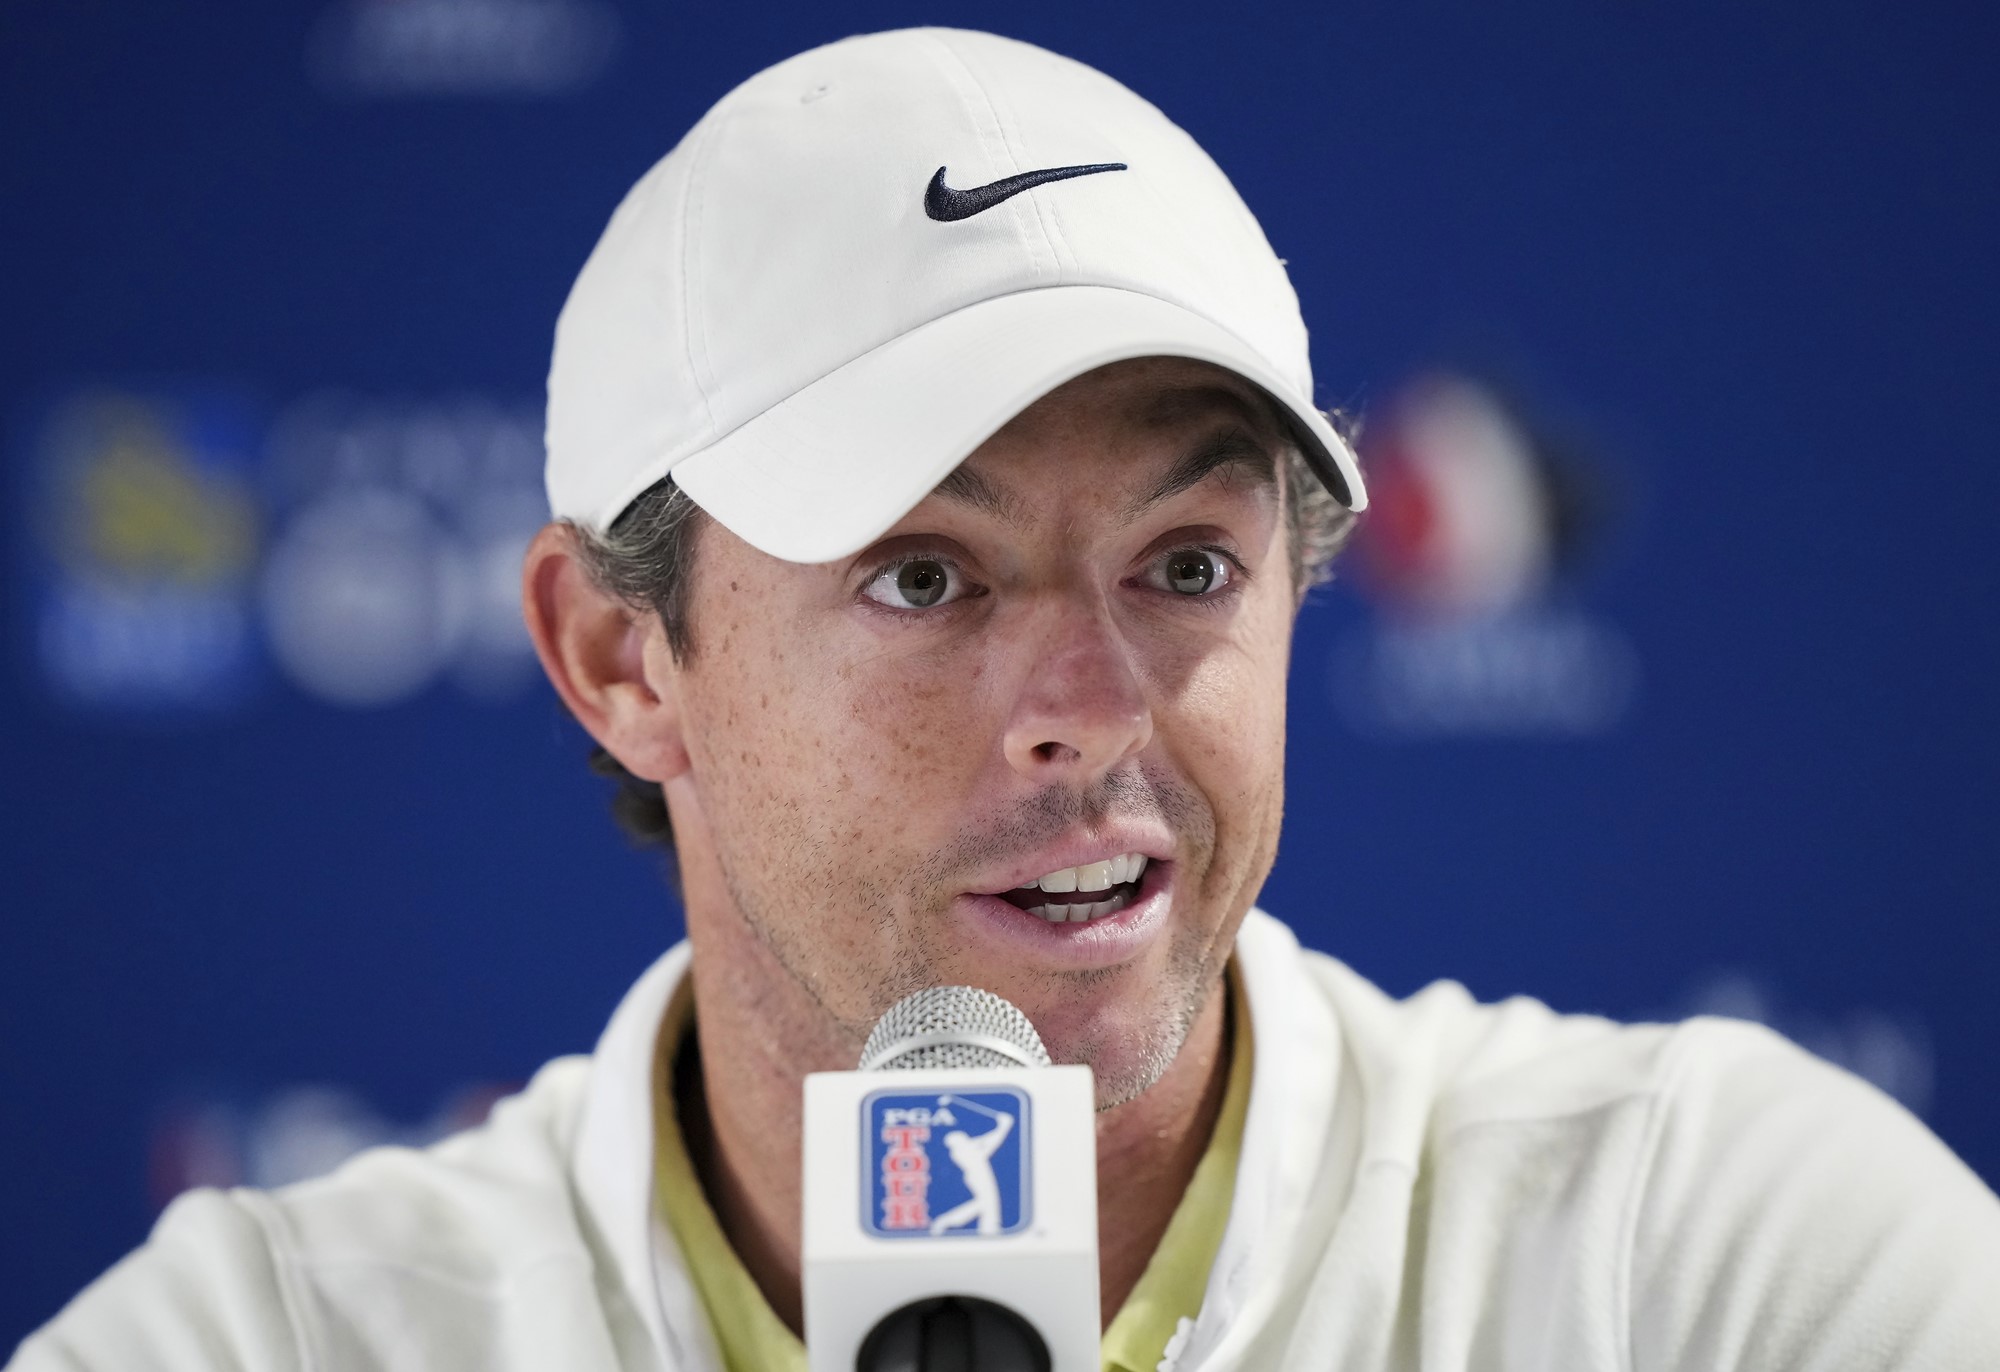 Rory McIlroy speaking into a microphone. He's wearing a white cap and white sweater. He's got short brown hair and brown eyes.